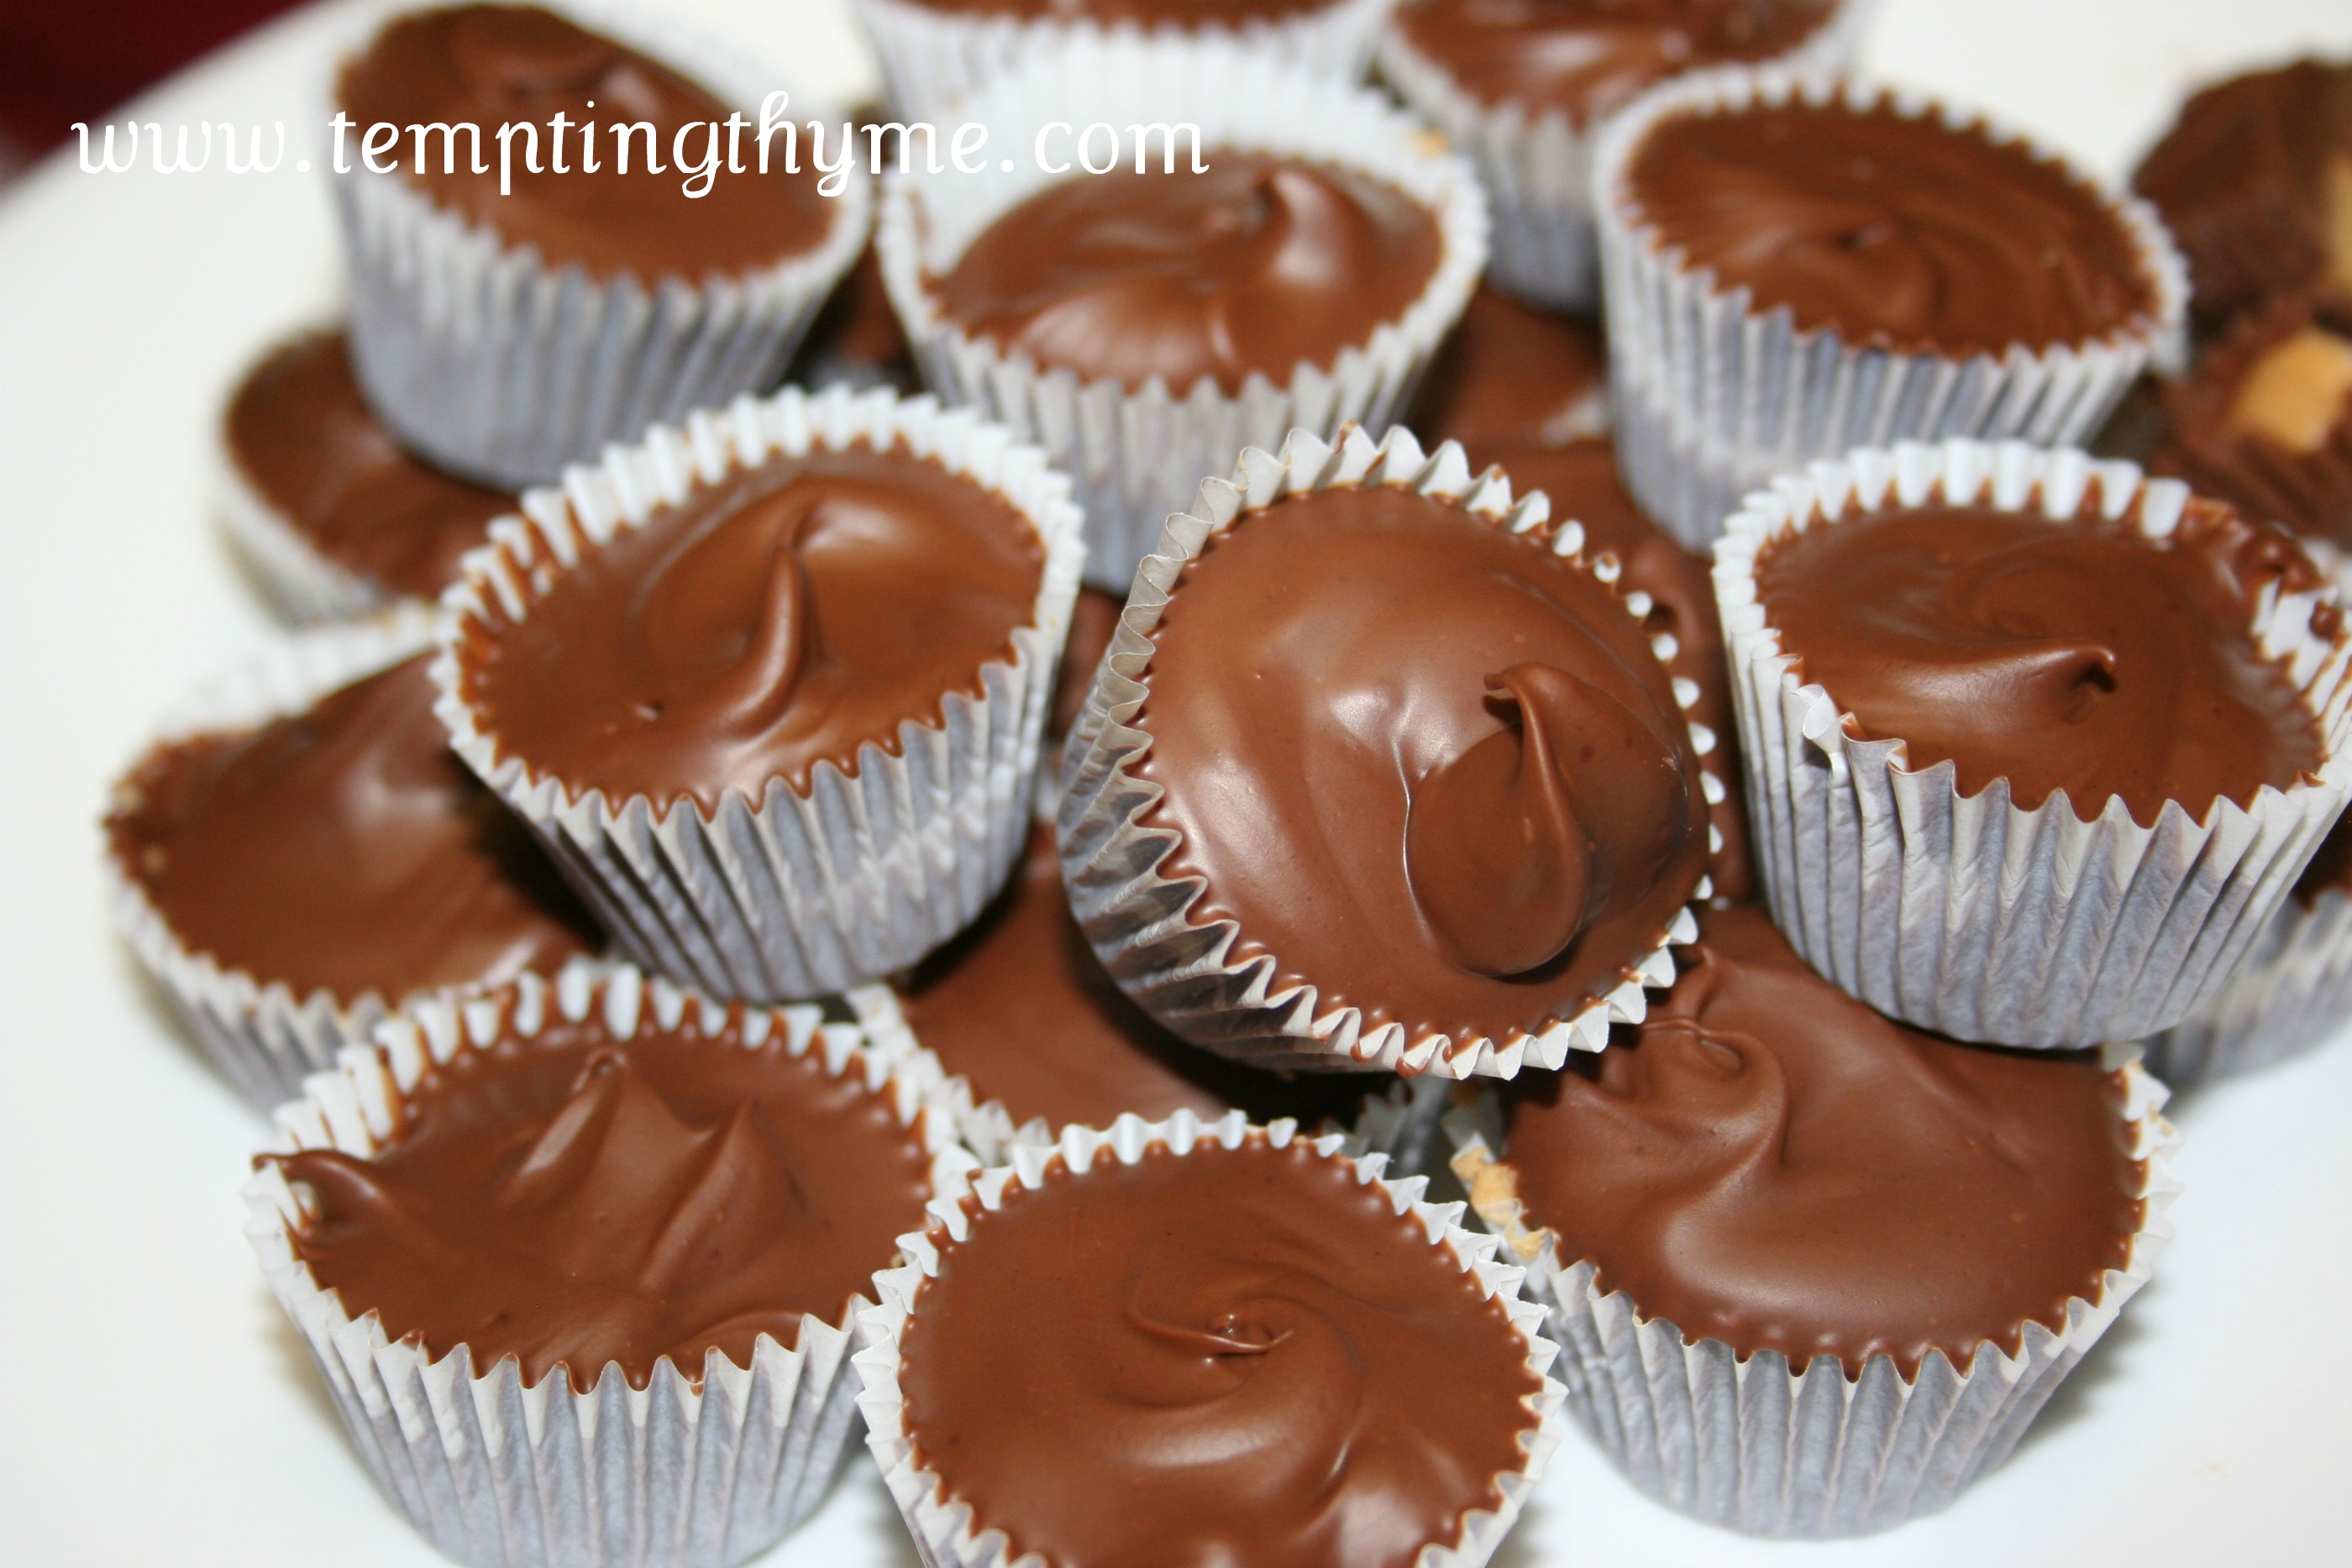 Tempting Thyme Homemade Peanut Butter Cups